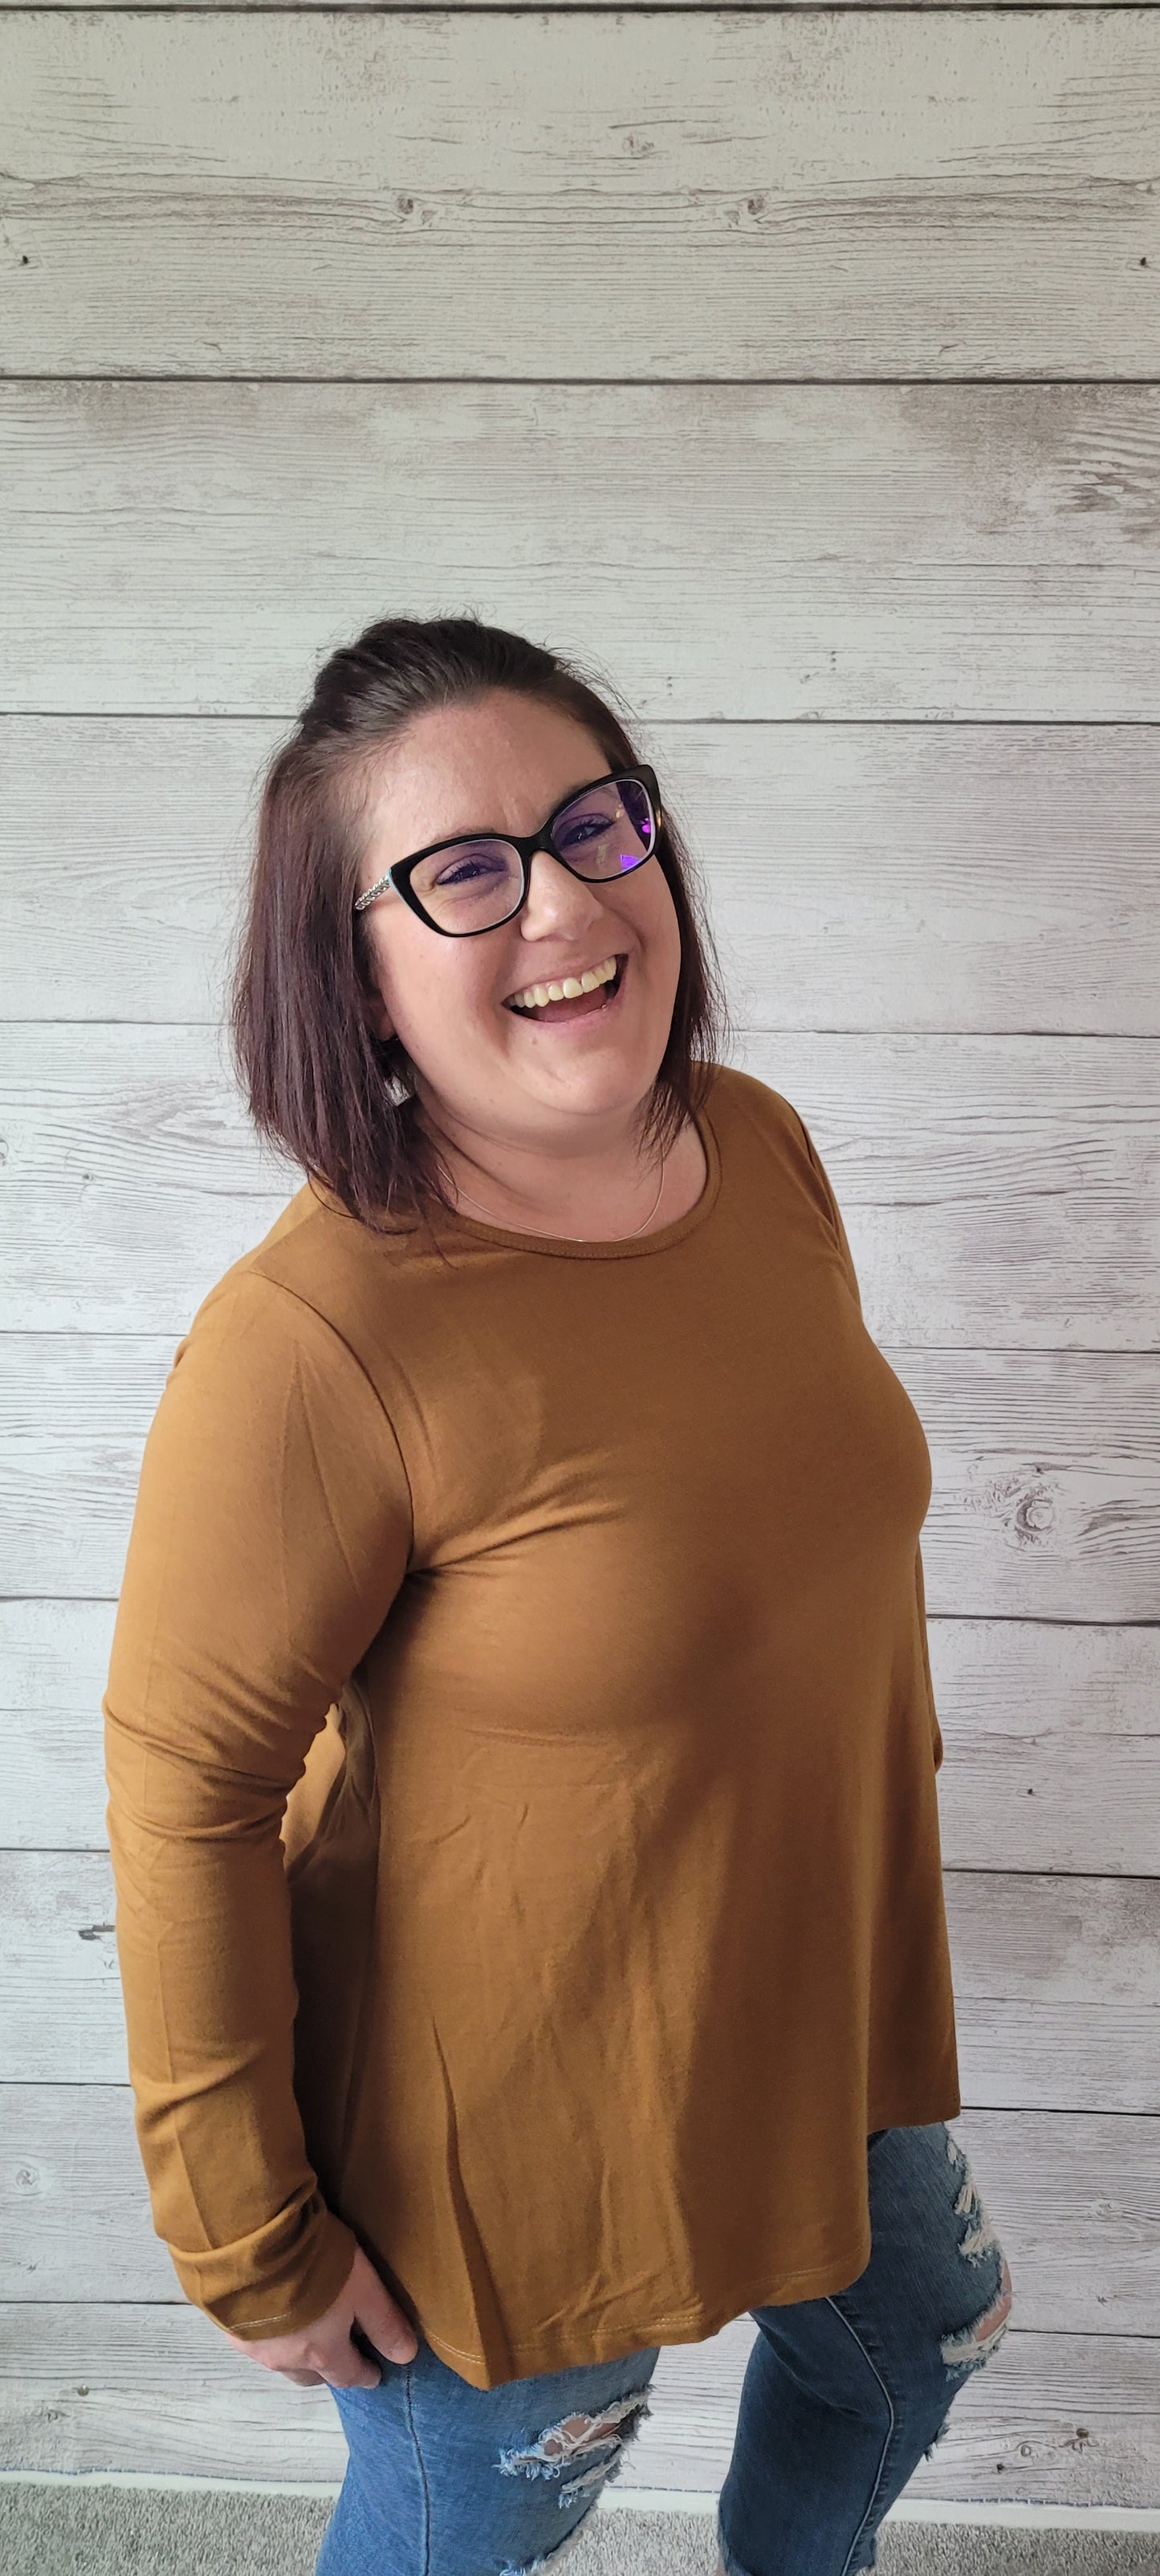 Ready for layering in style? Look no further than our Olivia French Terry Camel Top! With its cute scoop neckline and rounded hemline, you'll be looking cozy and chic all season long. Perfect for adding pizzazz to any outfit, this hip top will keep you comfy and stylish! Sizes small through large.